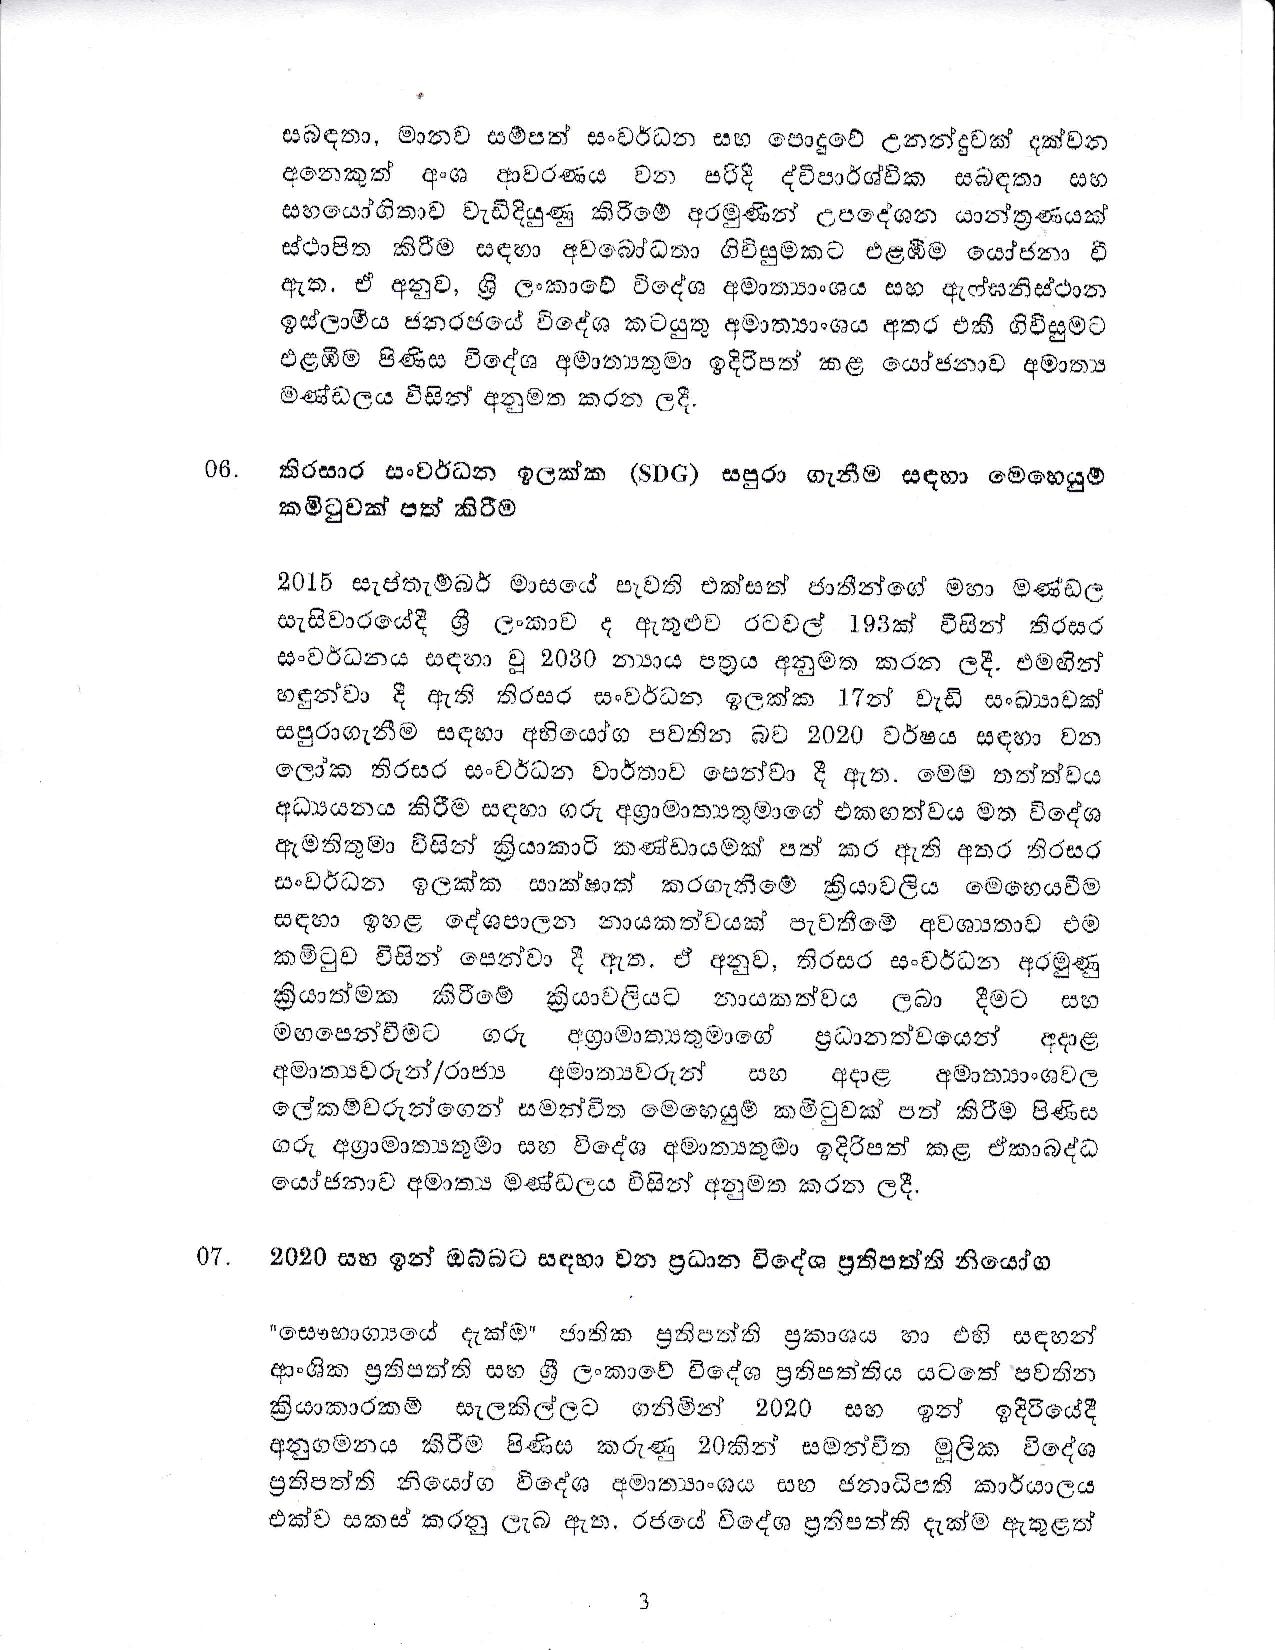 Cabinet Decision on 04.01.2021 page 003